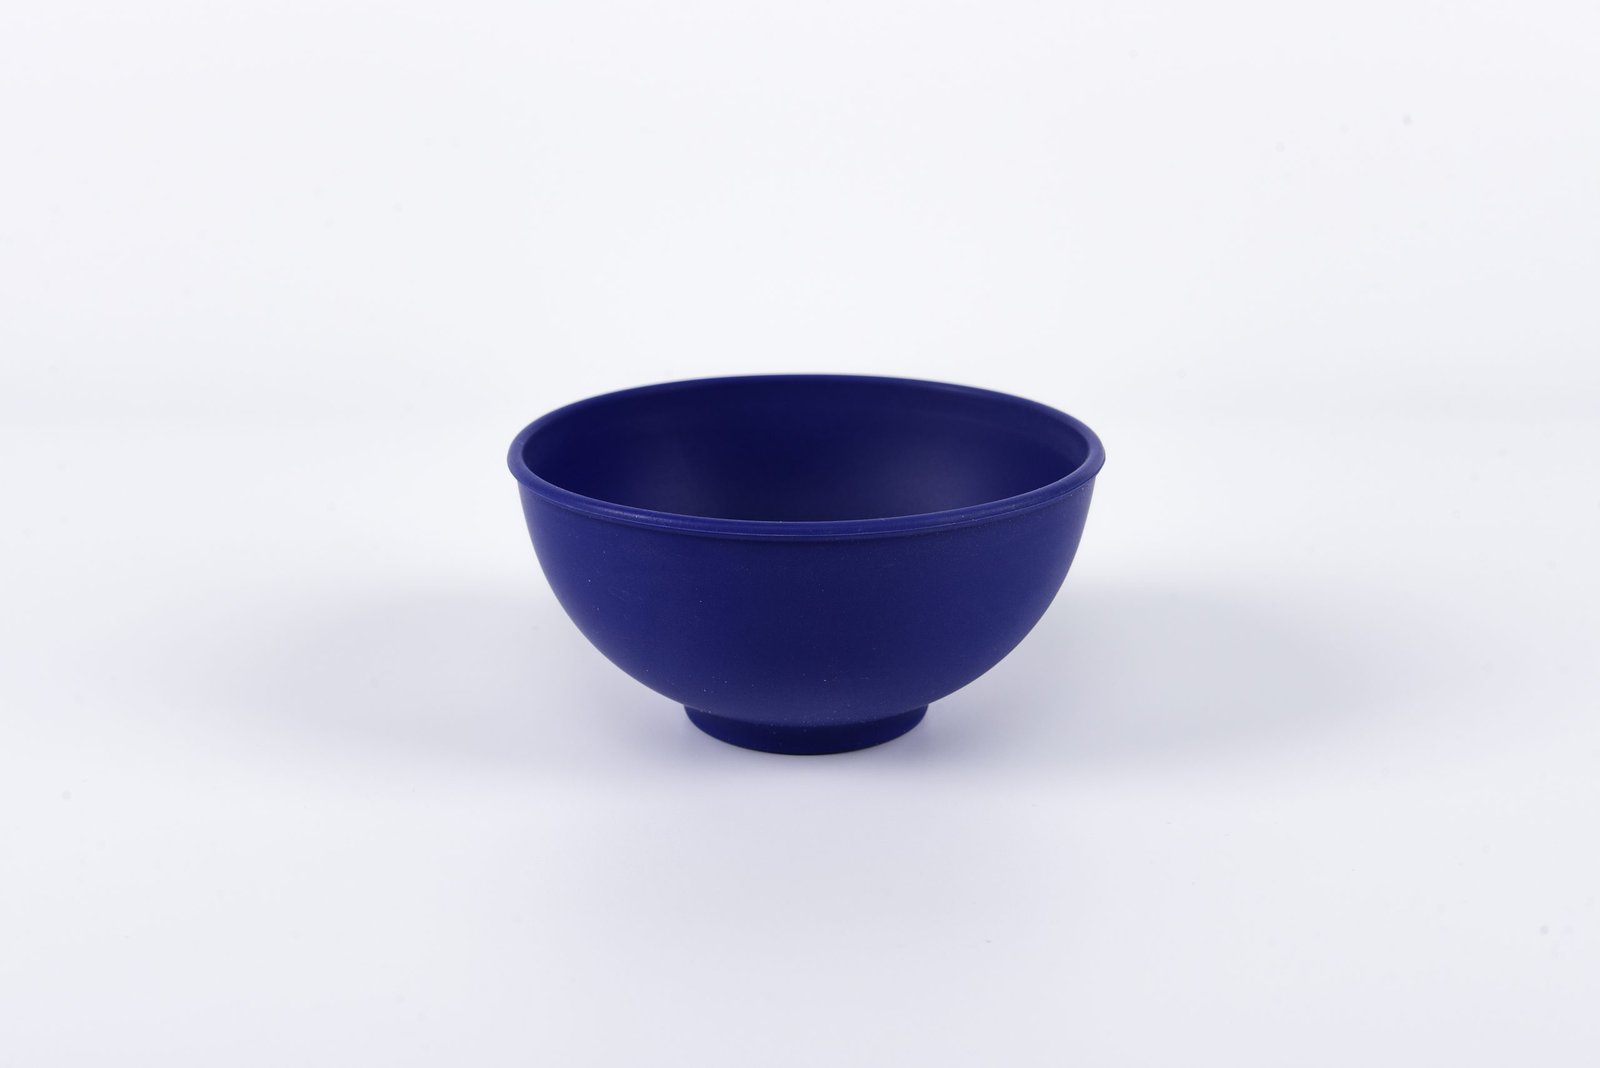 Silicon Blue flexible mask mixing bowls in various sizes